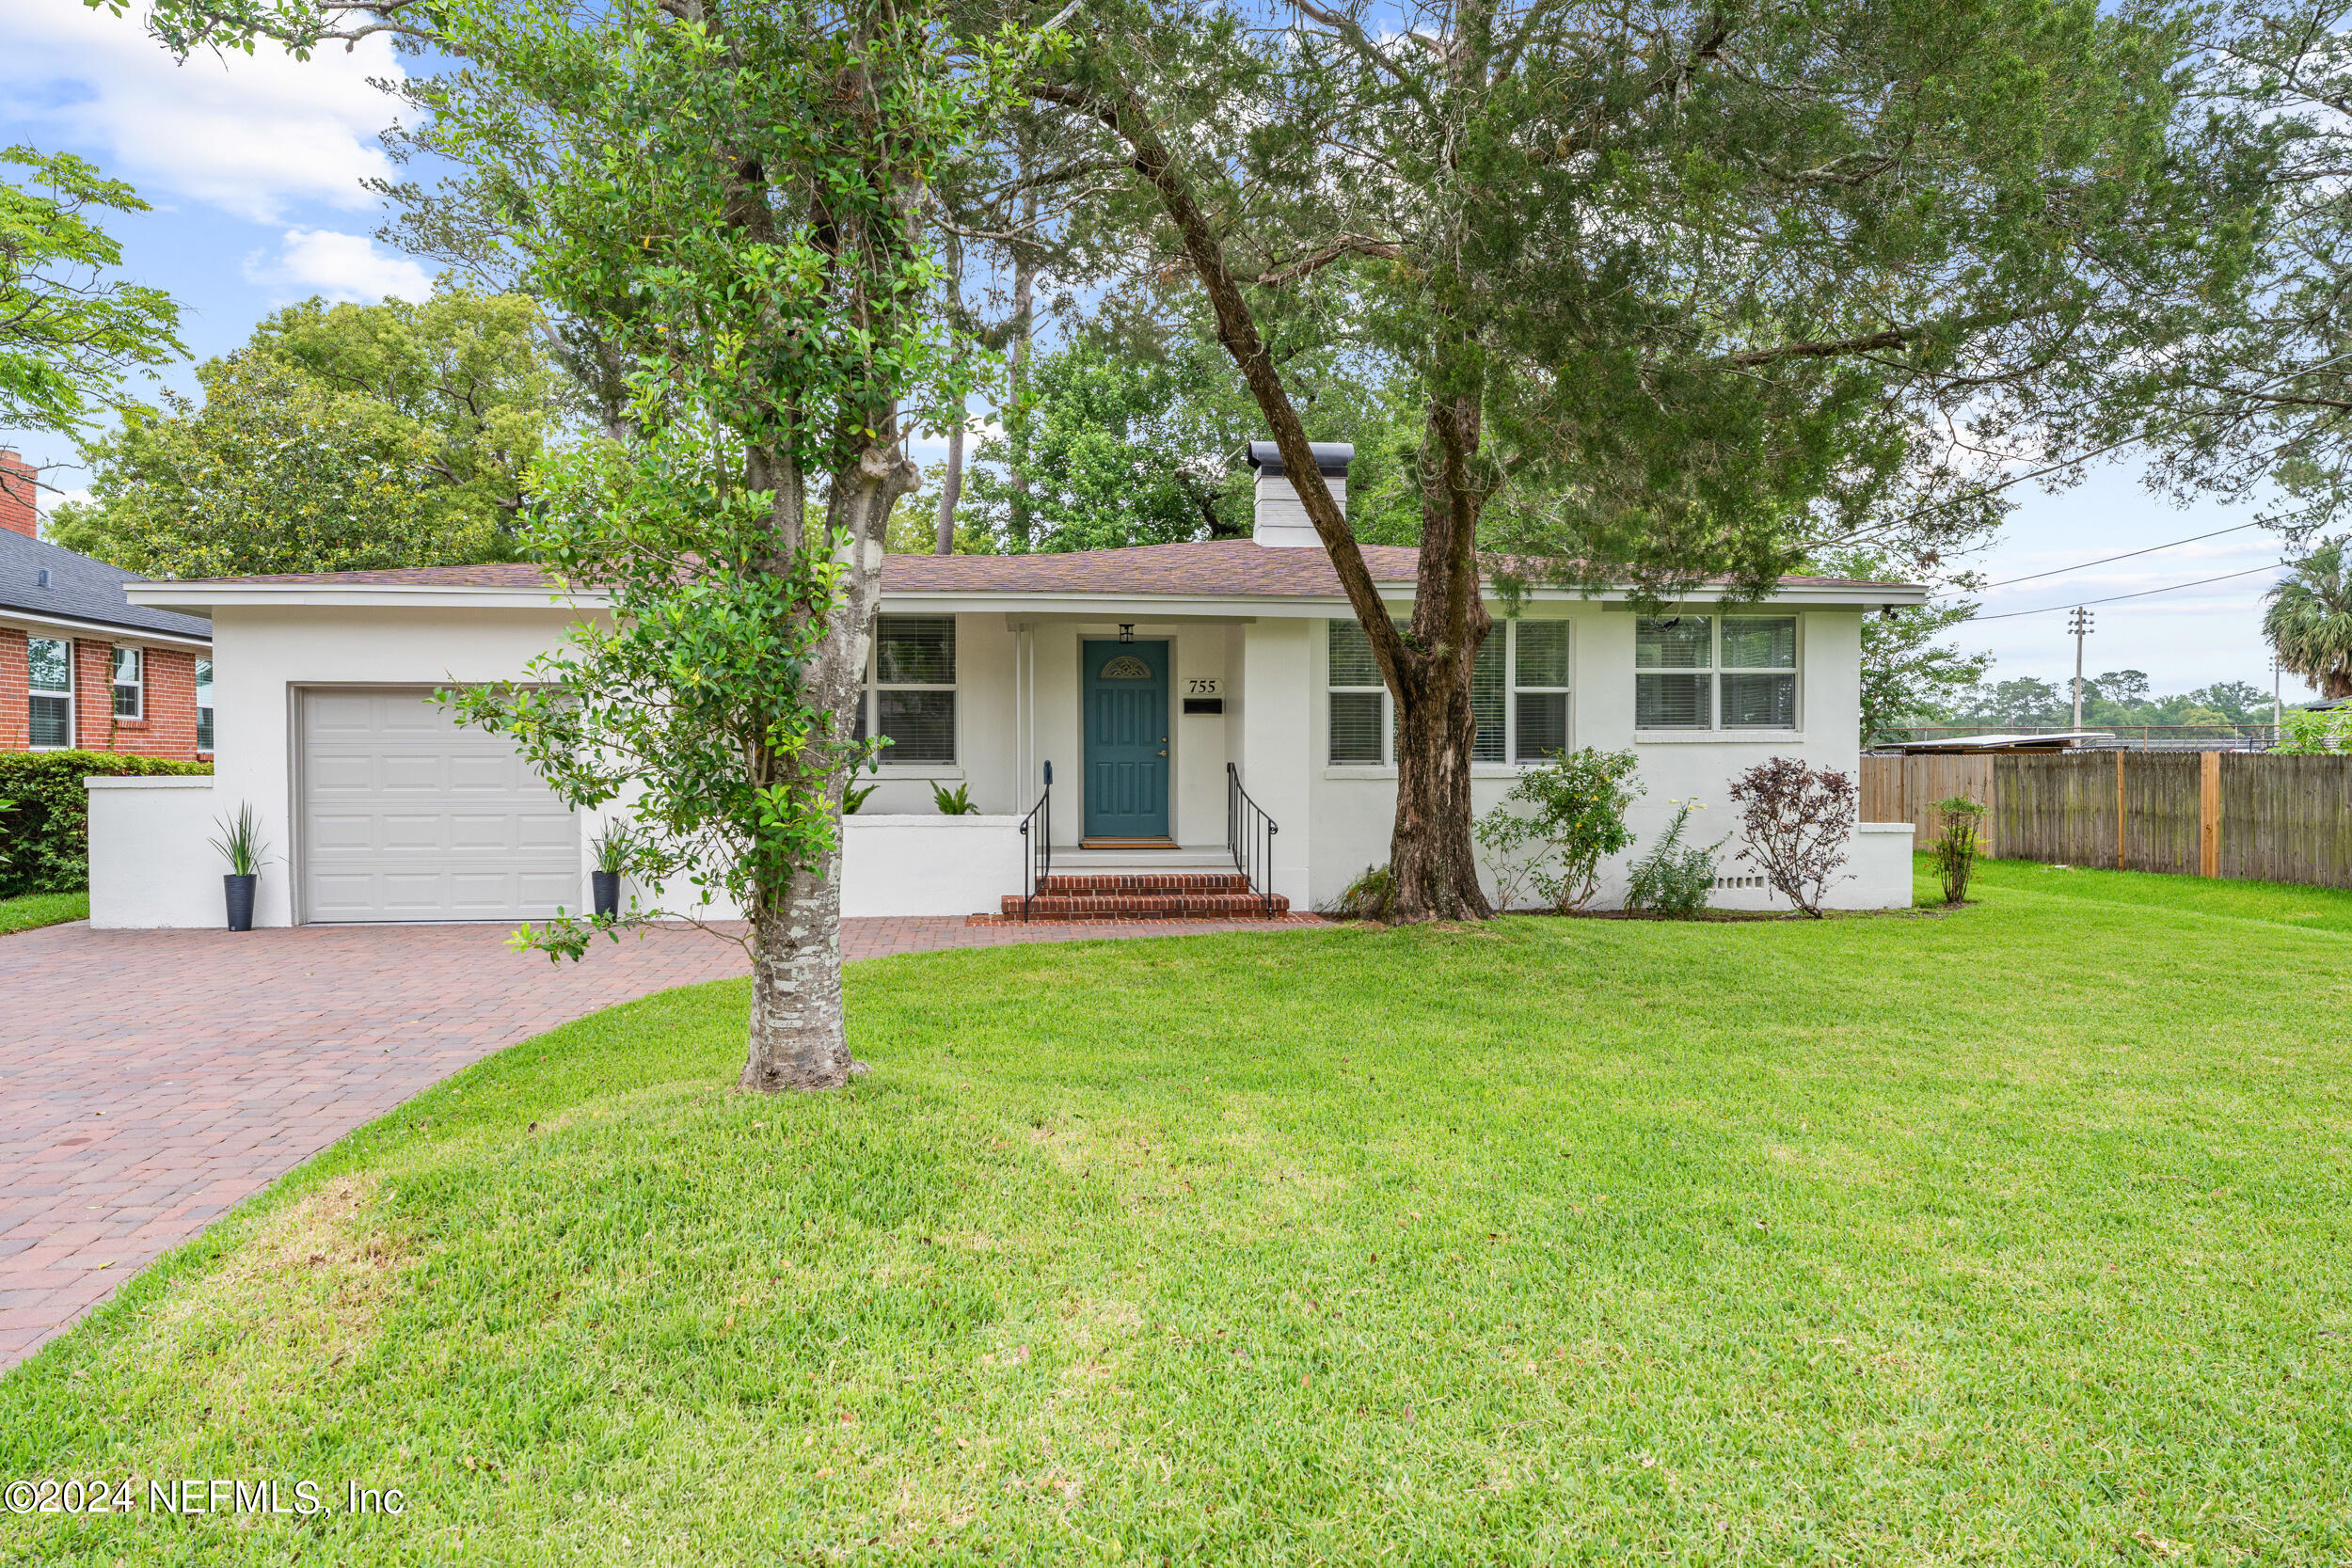 Jacksonville, FL home for sale located at 755 Old Hickory Road, Jacksonville, FL 32207